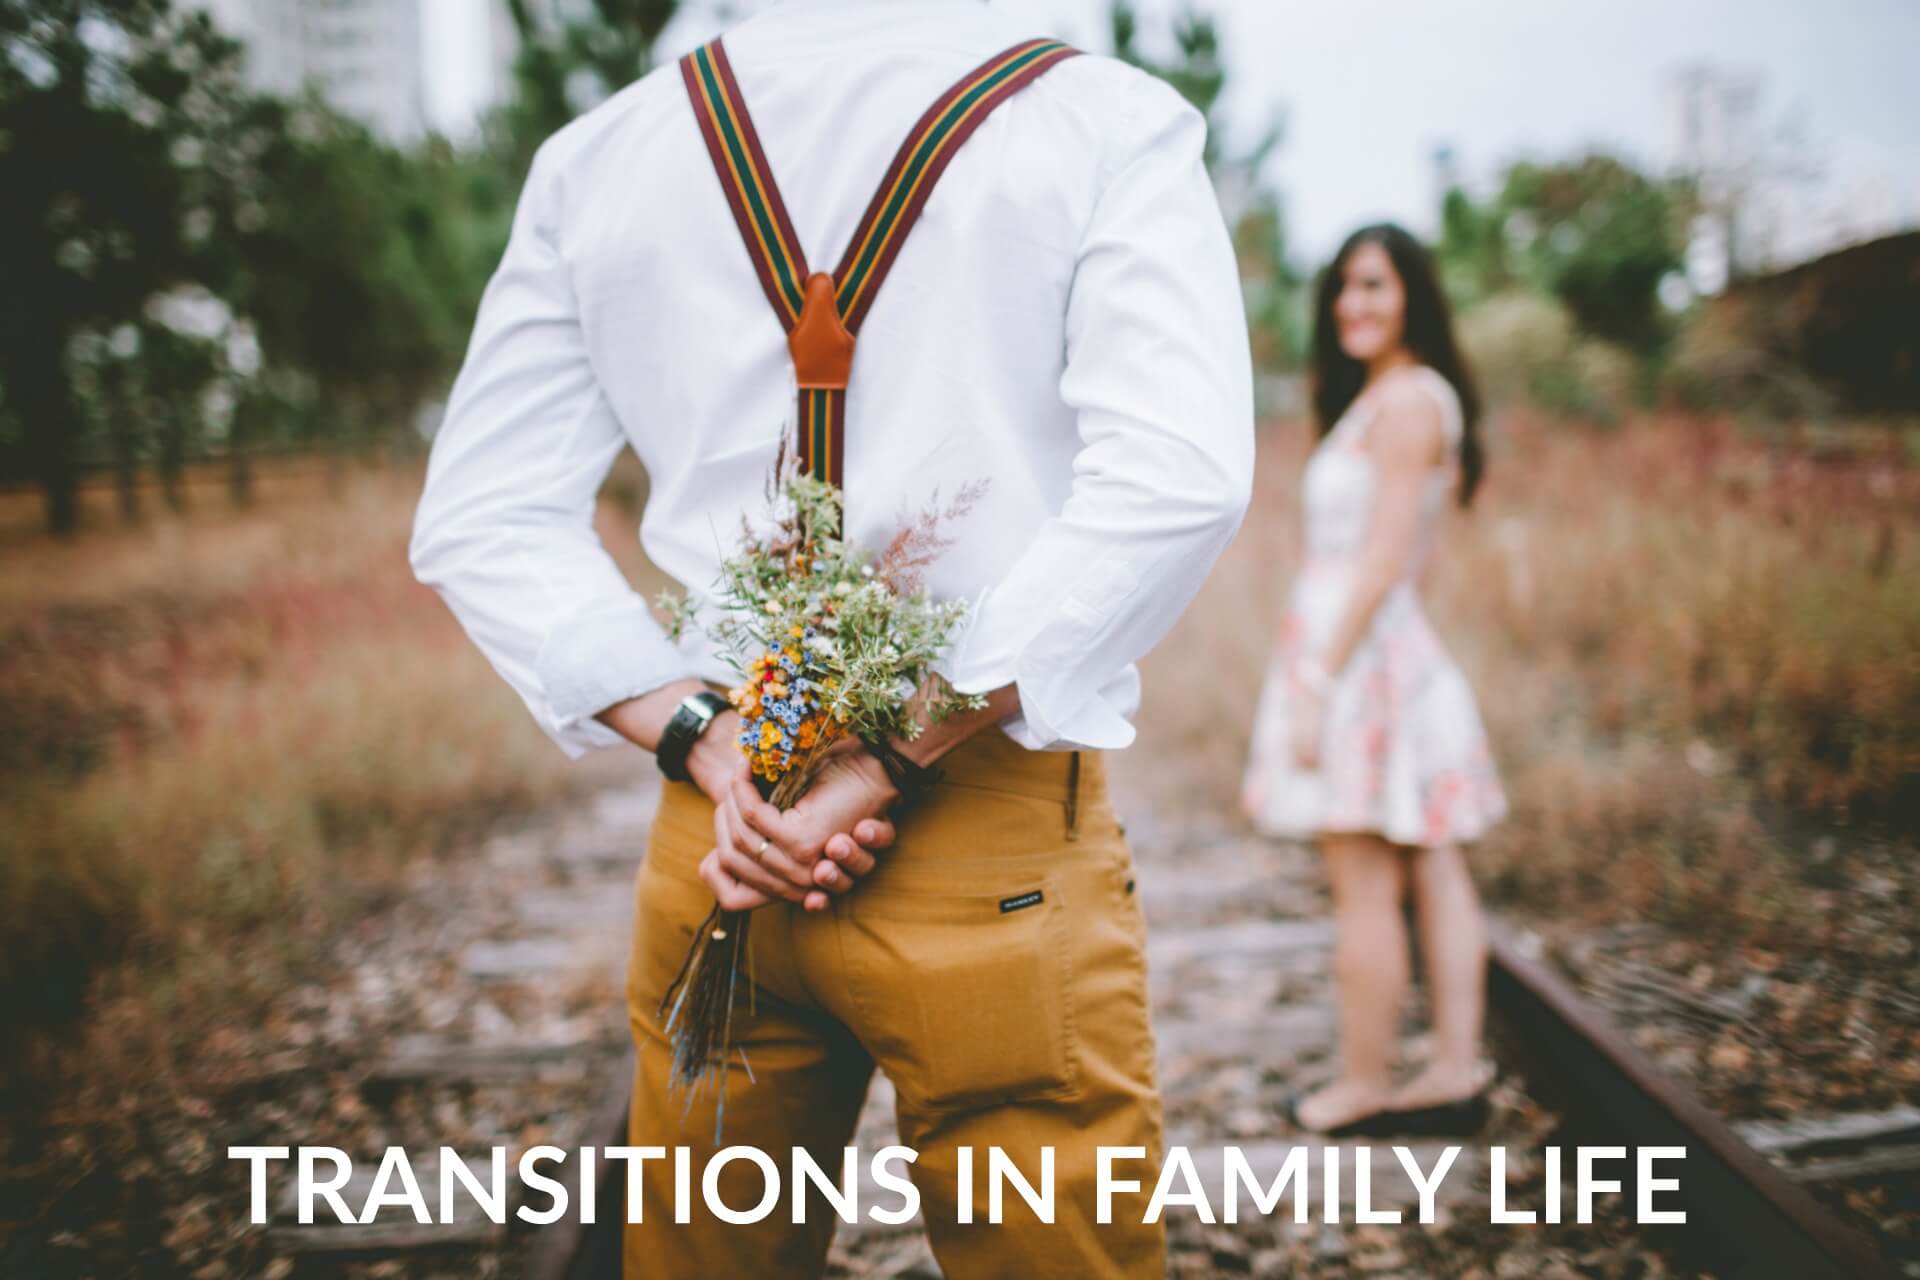 Transistions in Family Life